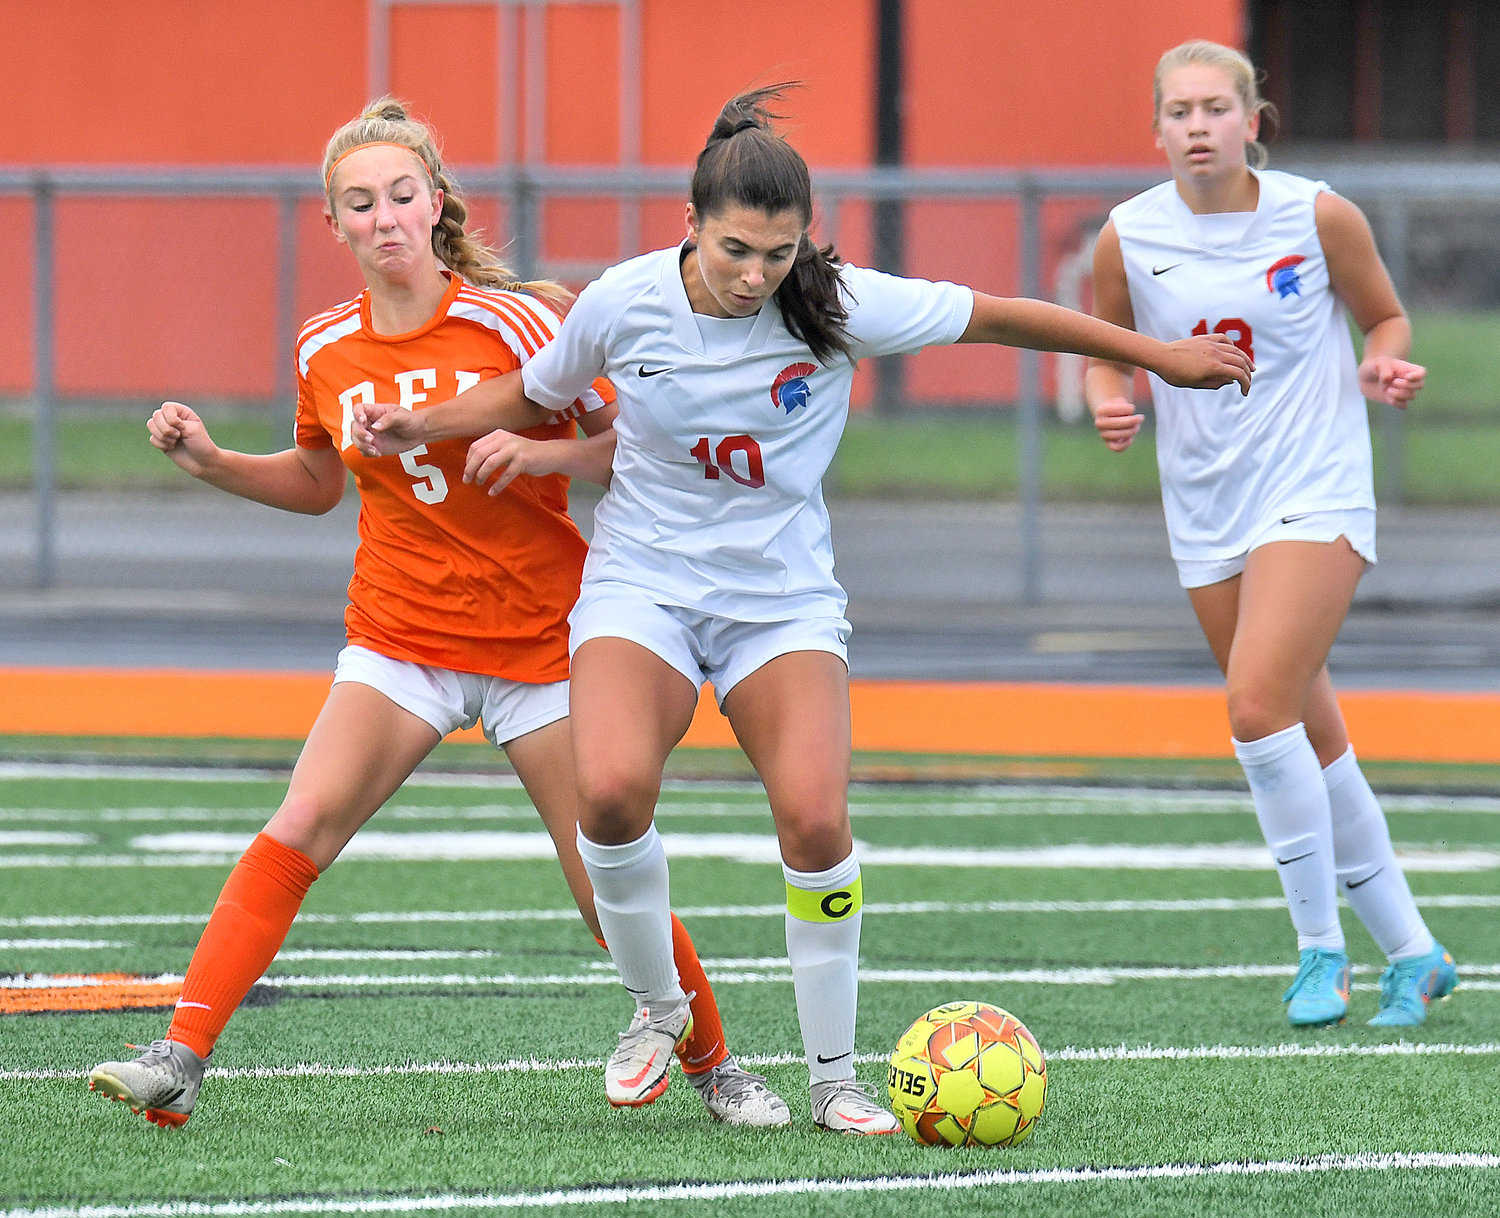 New Hartford's Talia Vitullo boxes out RFA's Brooke Egresits from the ball in the first half Thursday at RFA Stadium in Rome. Willa Pratt, who had two goals and two assists in the game, looks on.